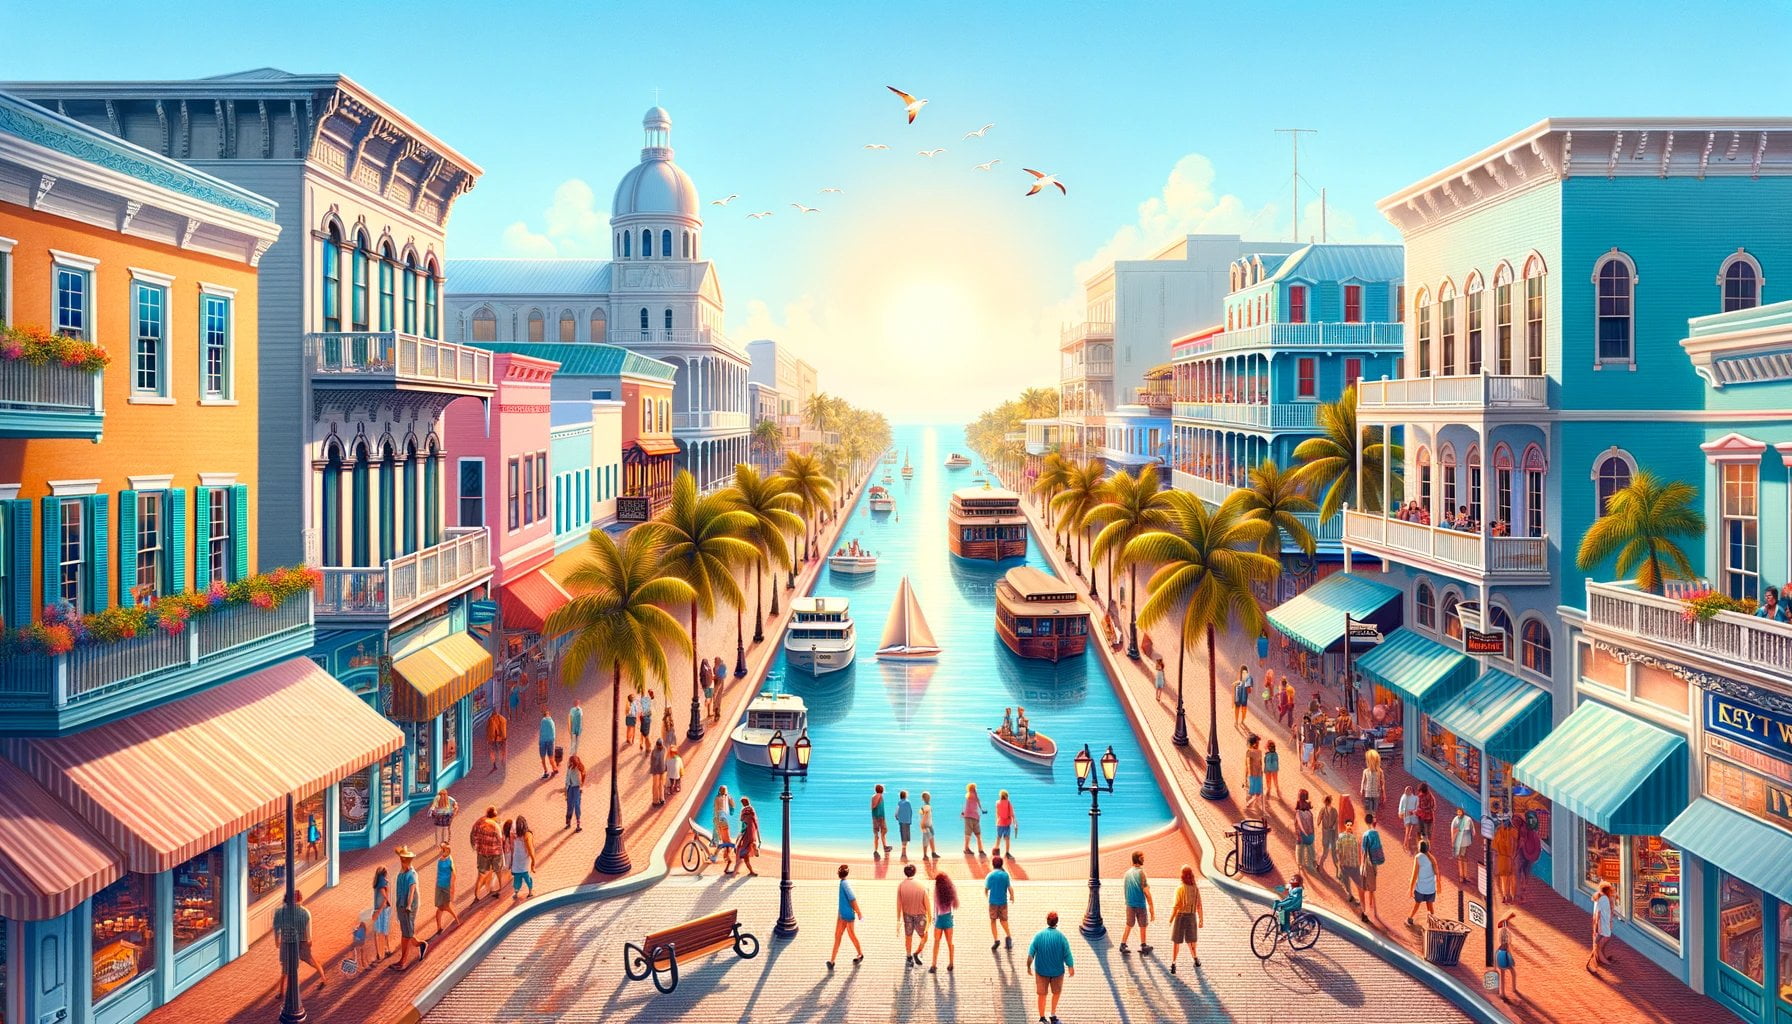 10 facts about key west